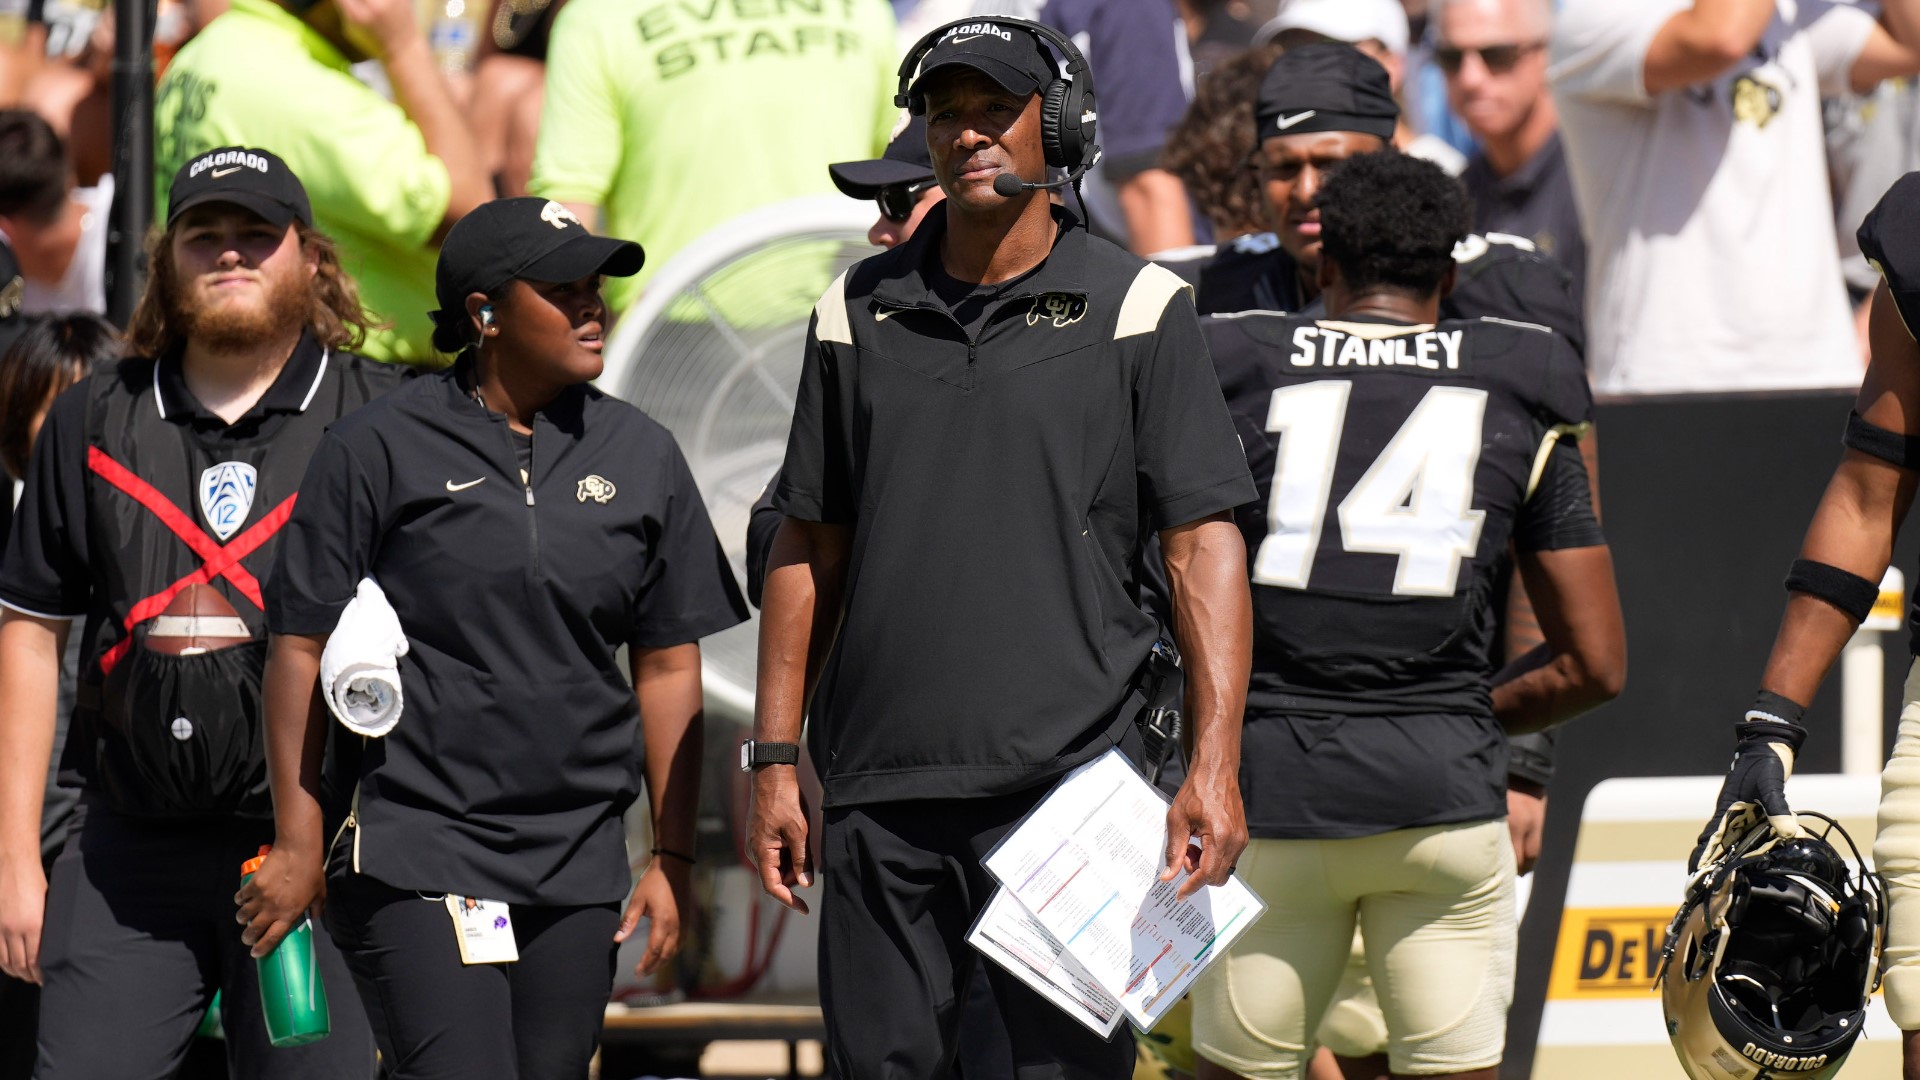 CU lost 30-0 on Saturday afternoon and head coach Karl Dorrell is intent on getting the offensive problems fixed.